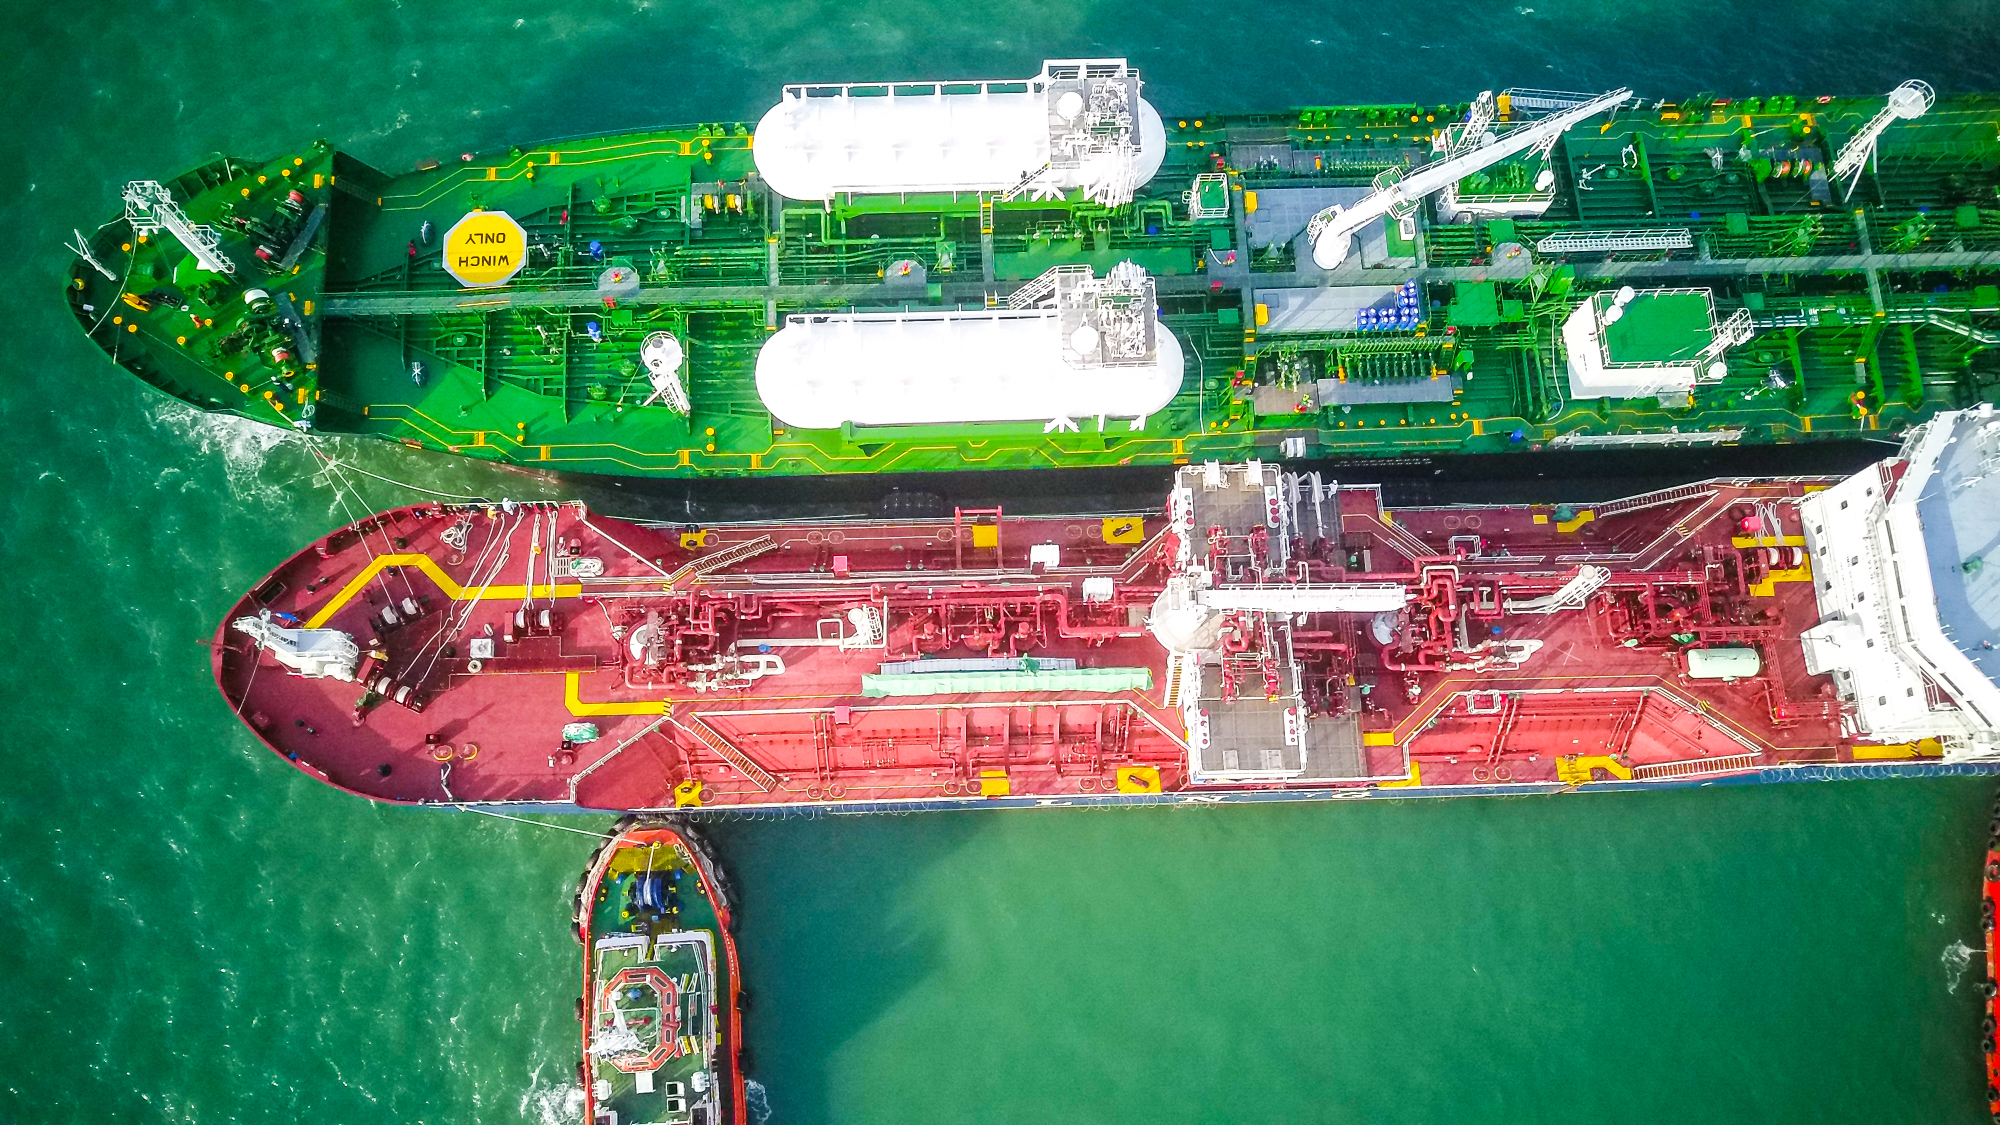 Avenir Advantage wrapped up its first LNG bunkering in Port Klang